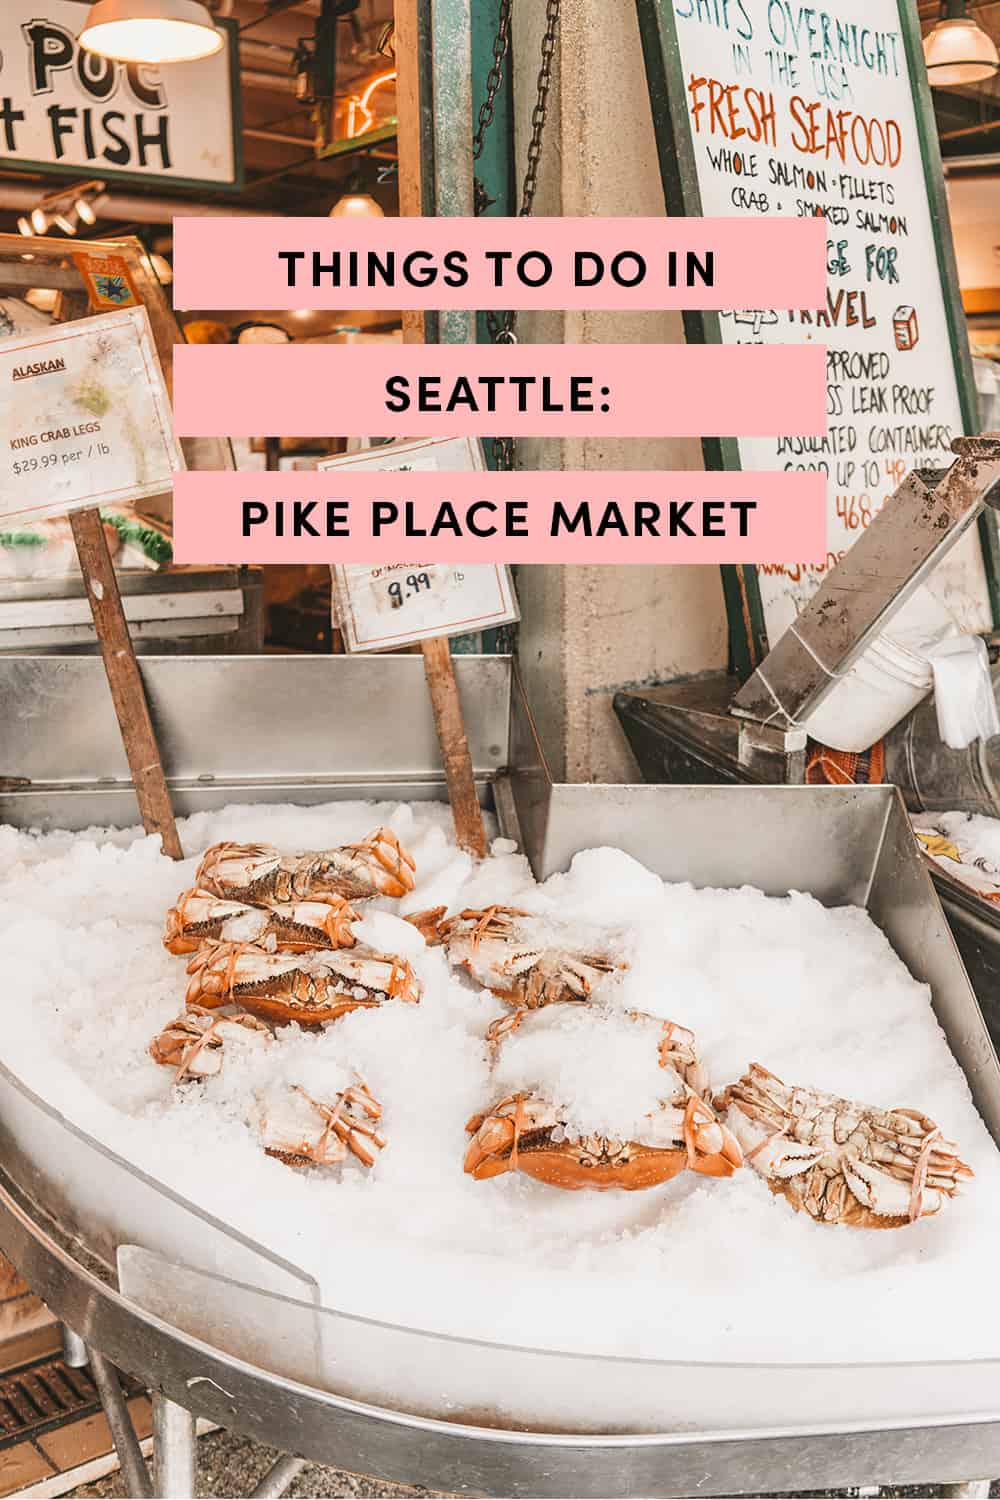 Pike Place Market: Things To Do In Seattle, WA